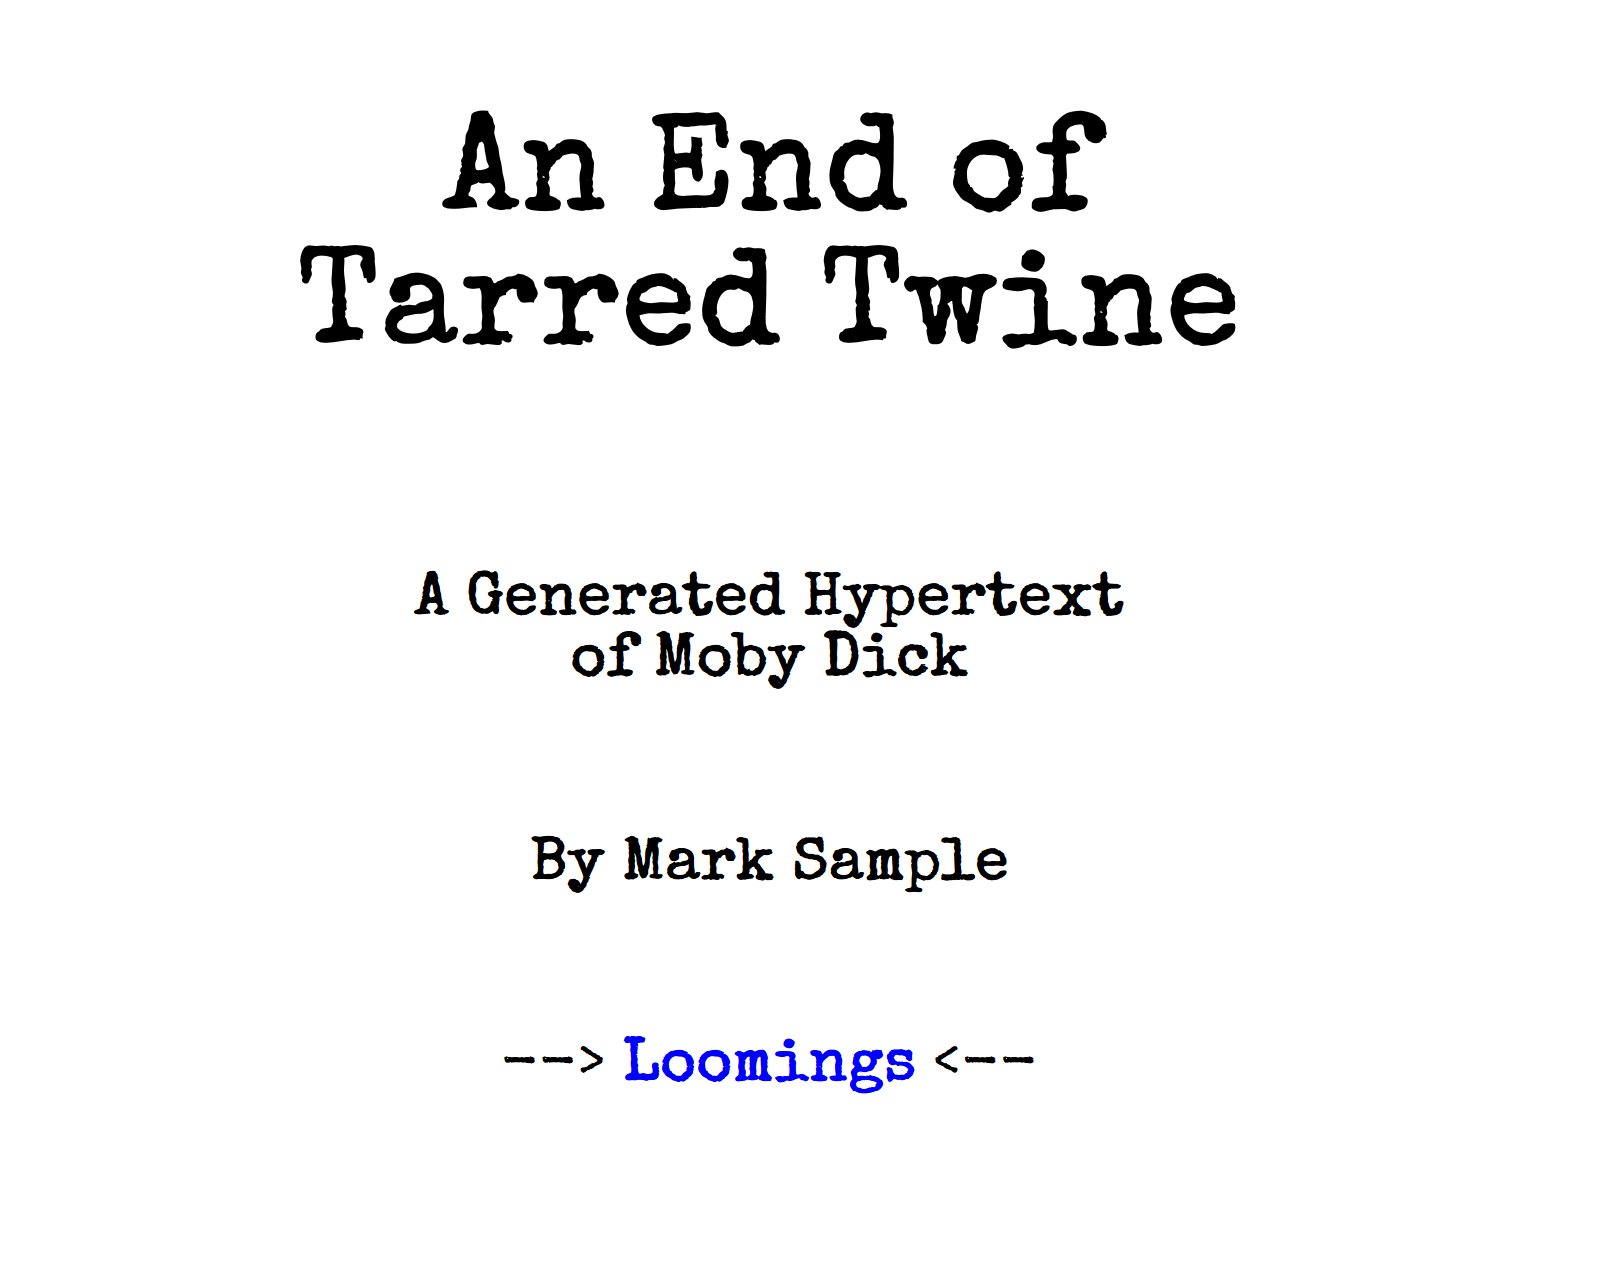 An End of Tarred Twine by samplereality